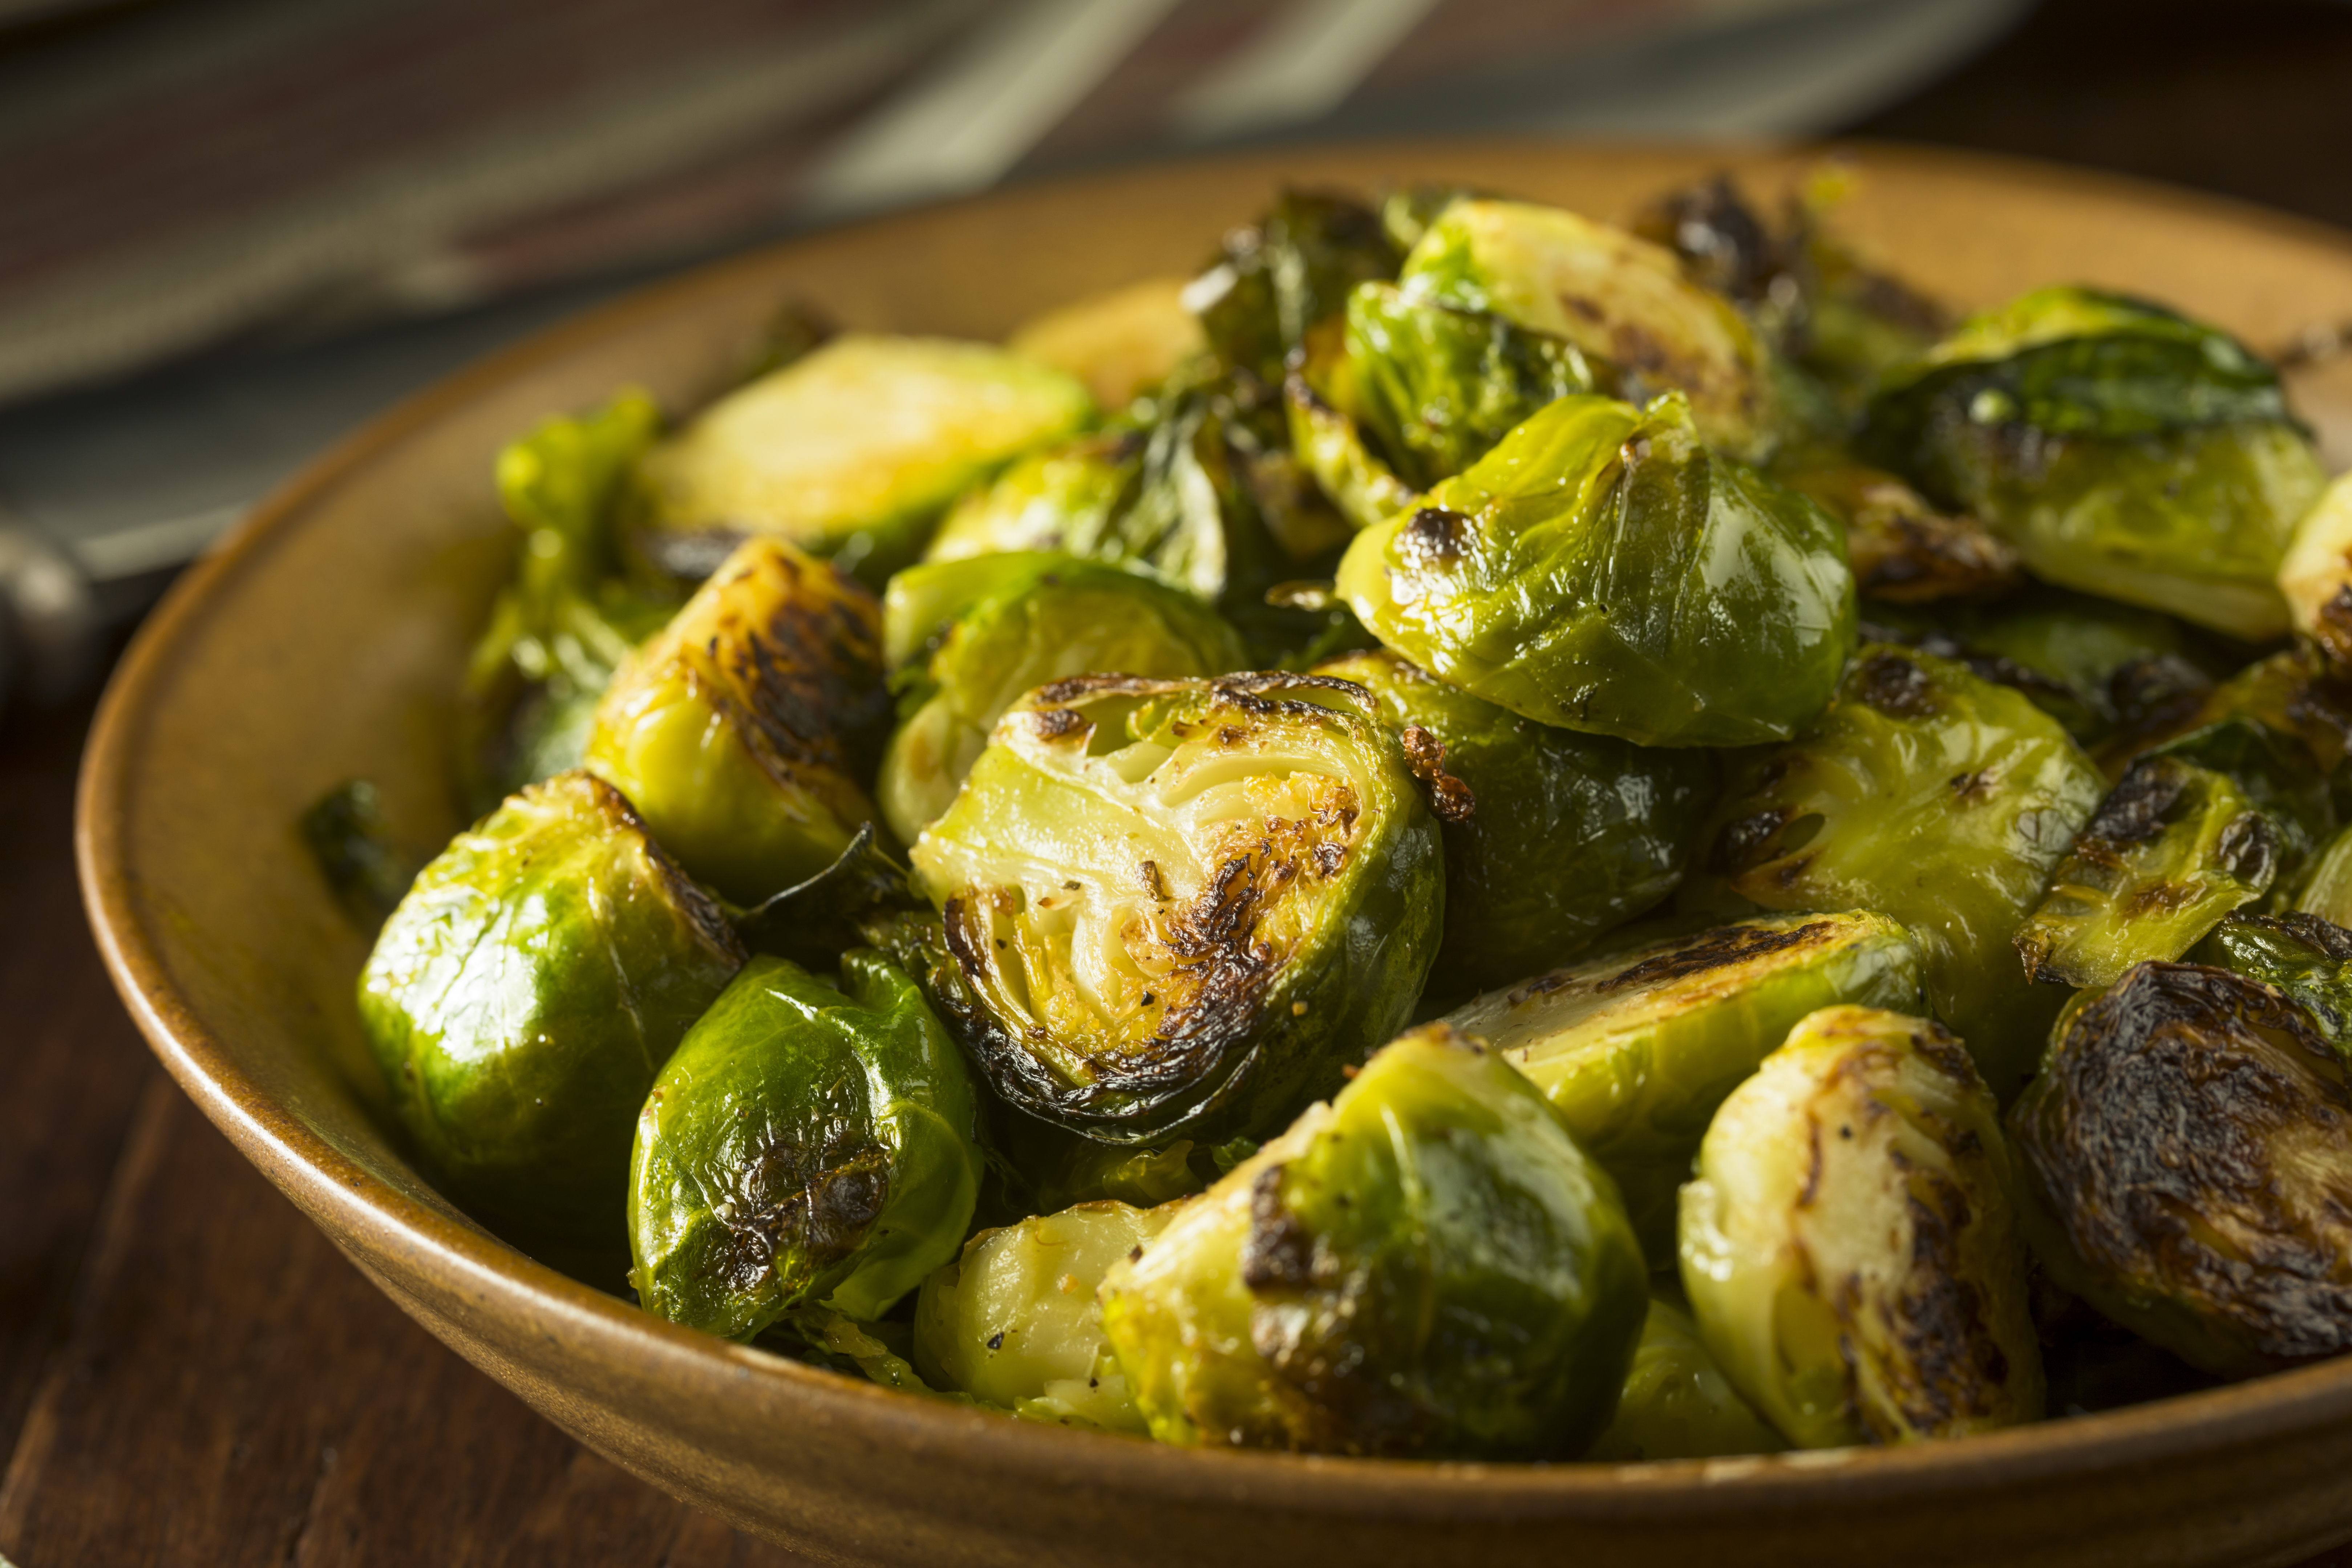 Tempted to try these Brussels Sprouts? Read on!